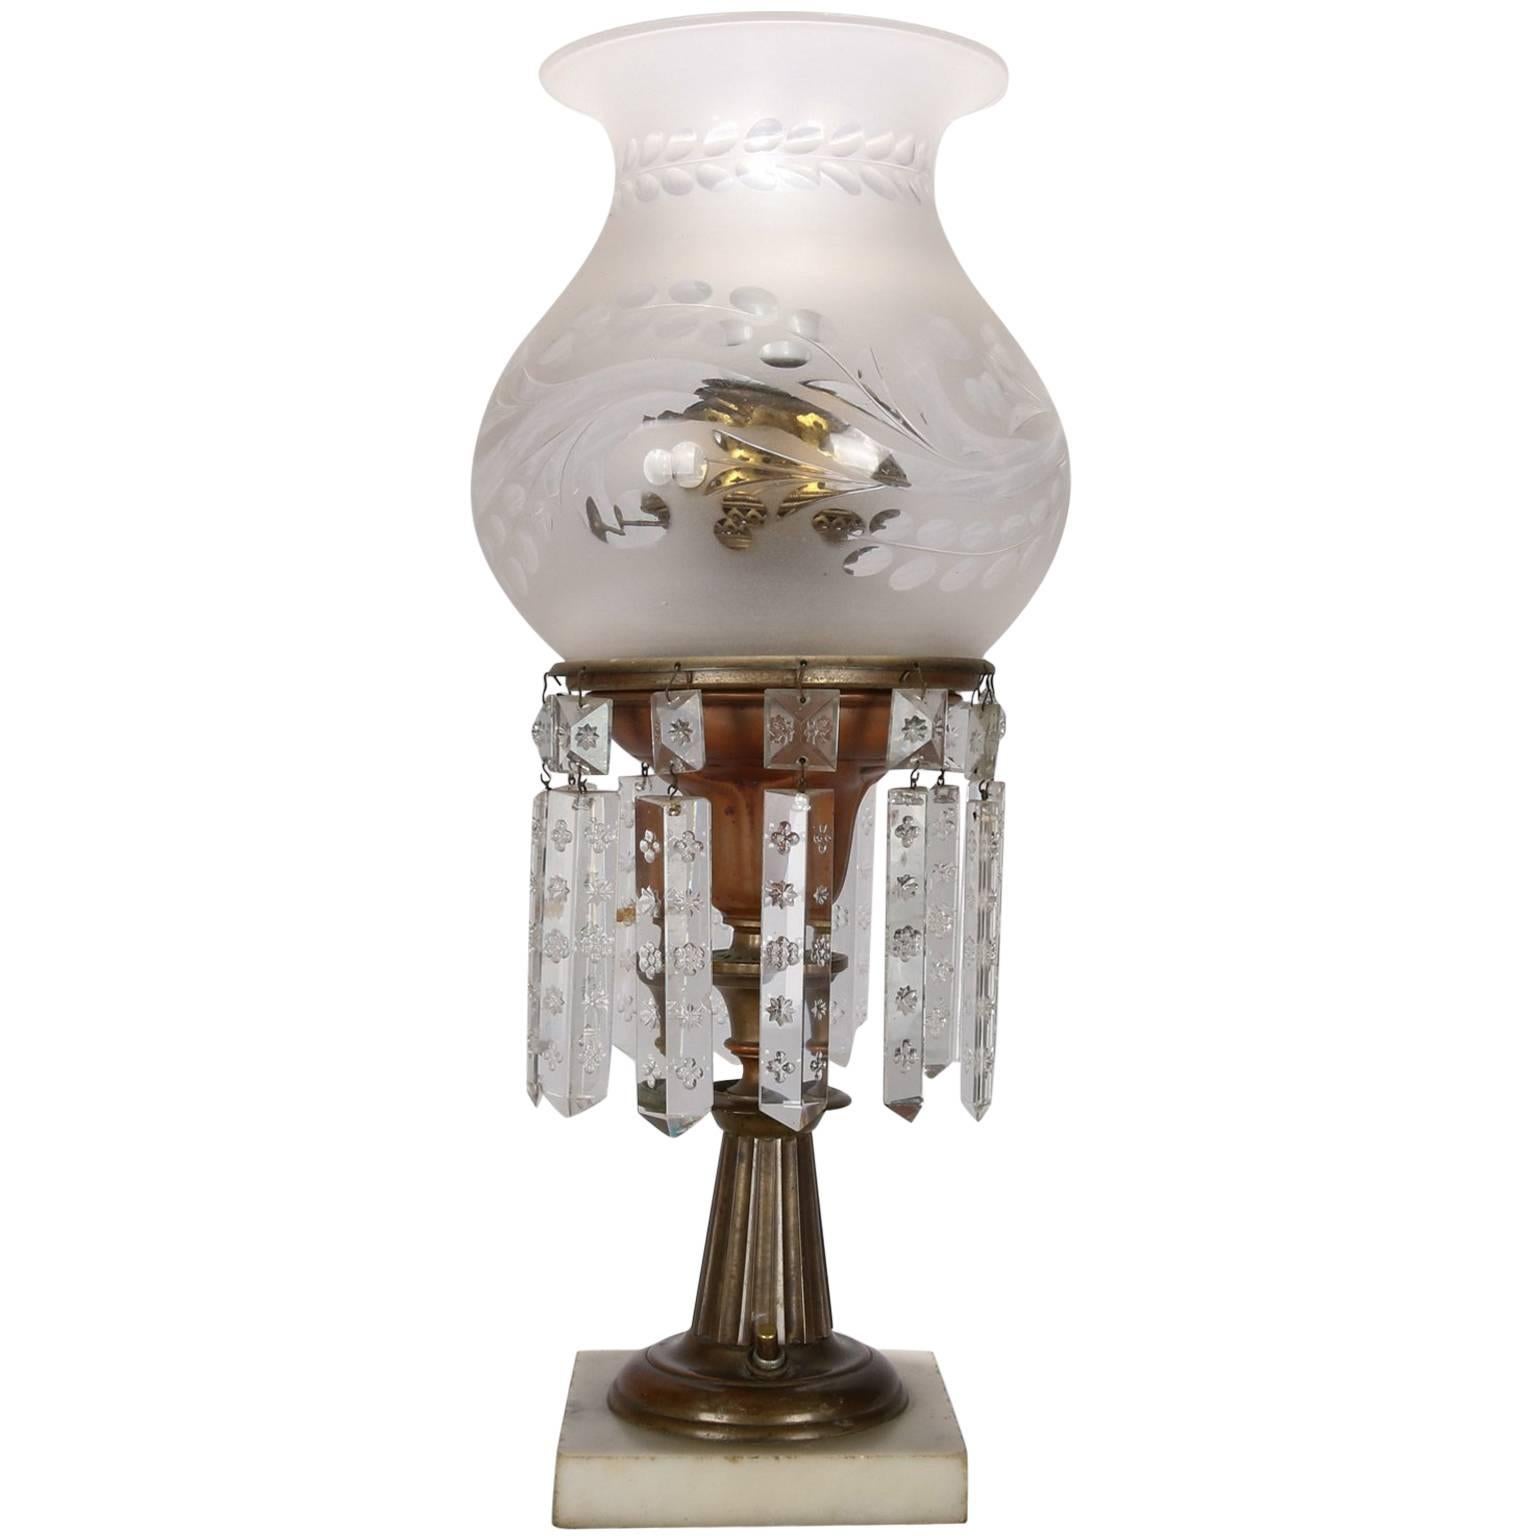 Antique Brass, Crystal & Marble Electrified Solar Table Lamp, The Arctic MB Co.